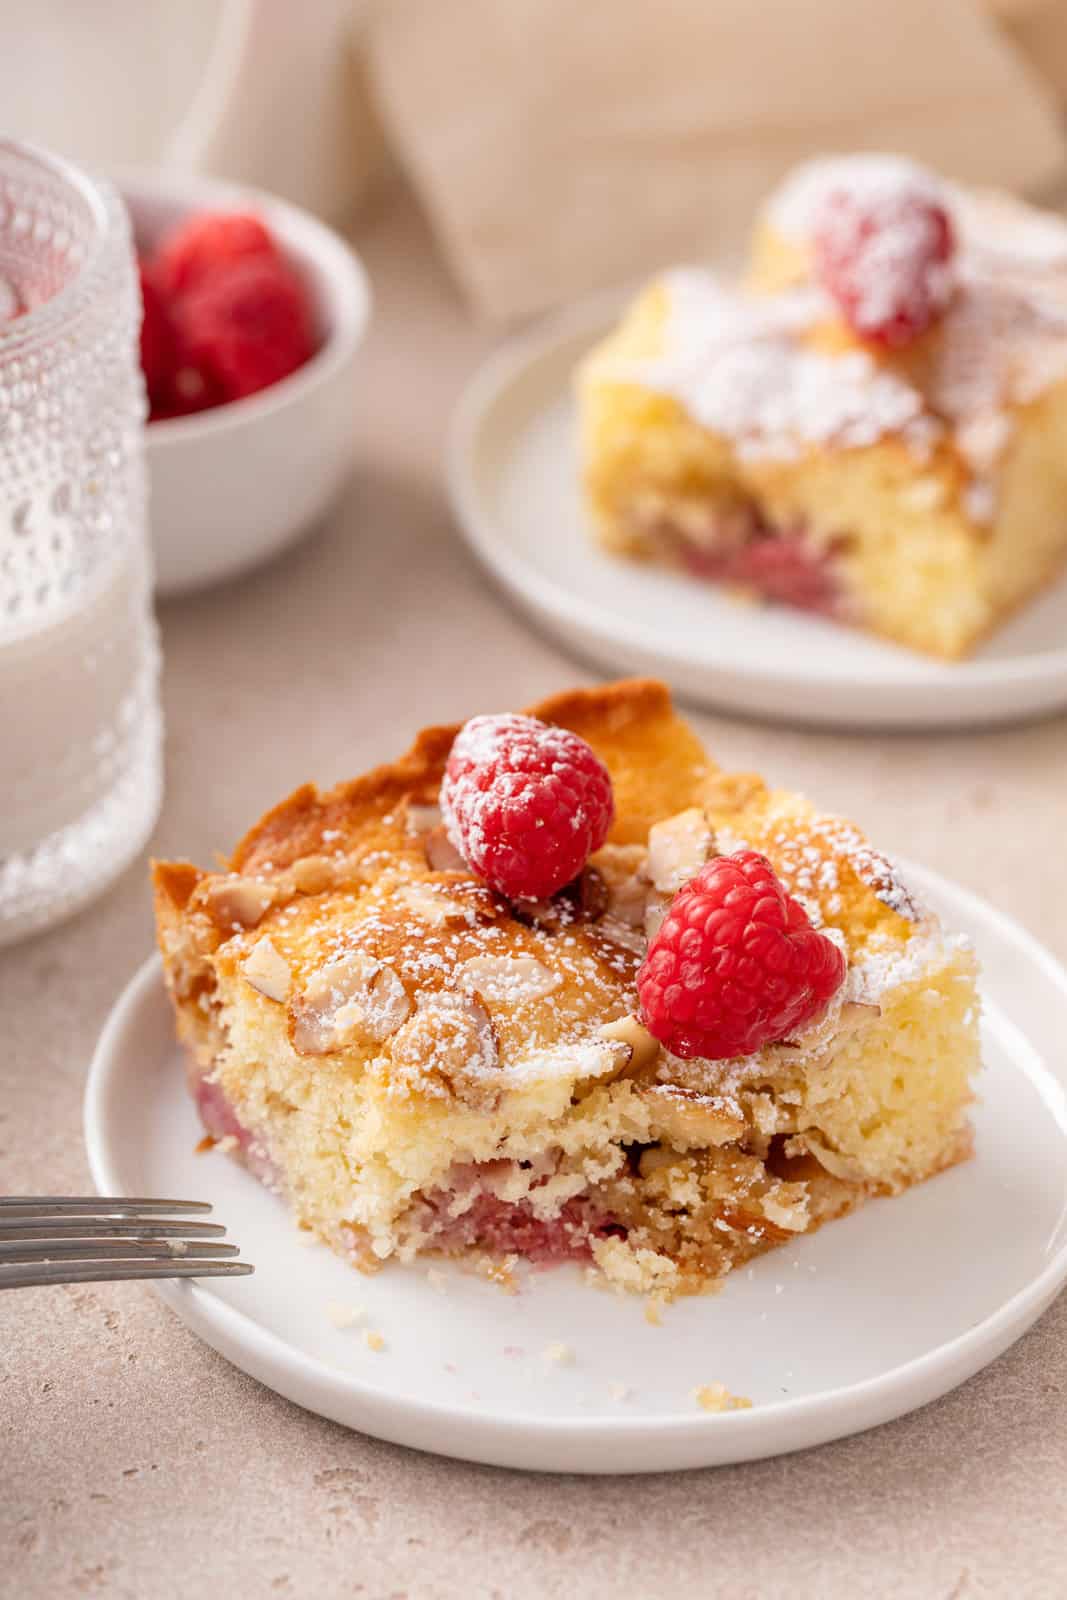 Plated slice of raspberry coffee cake with a bite cut from the corner.